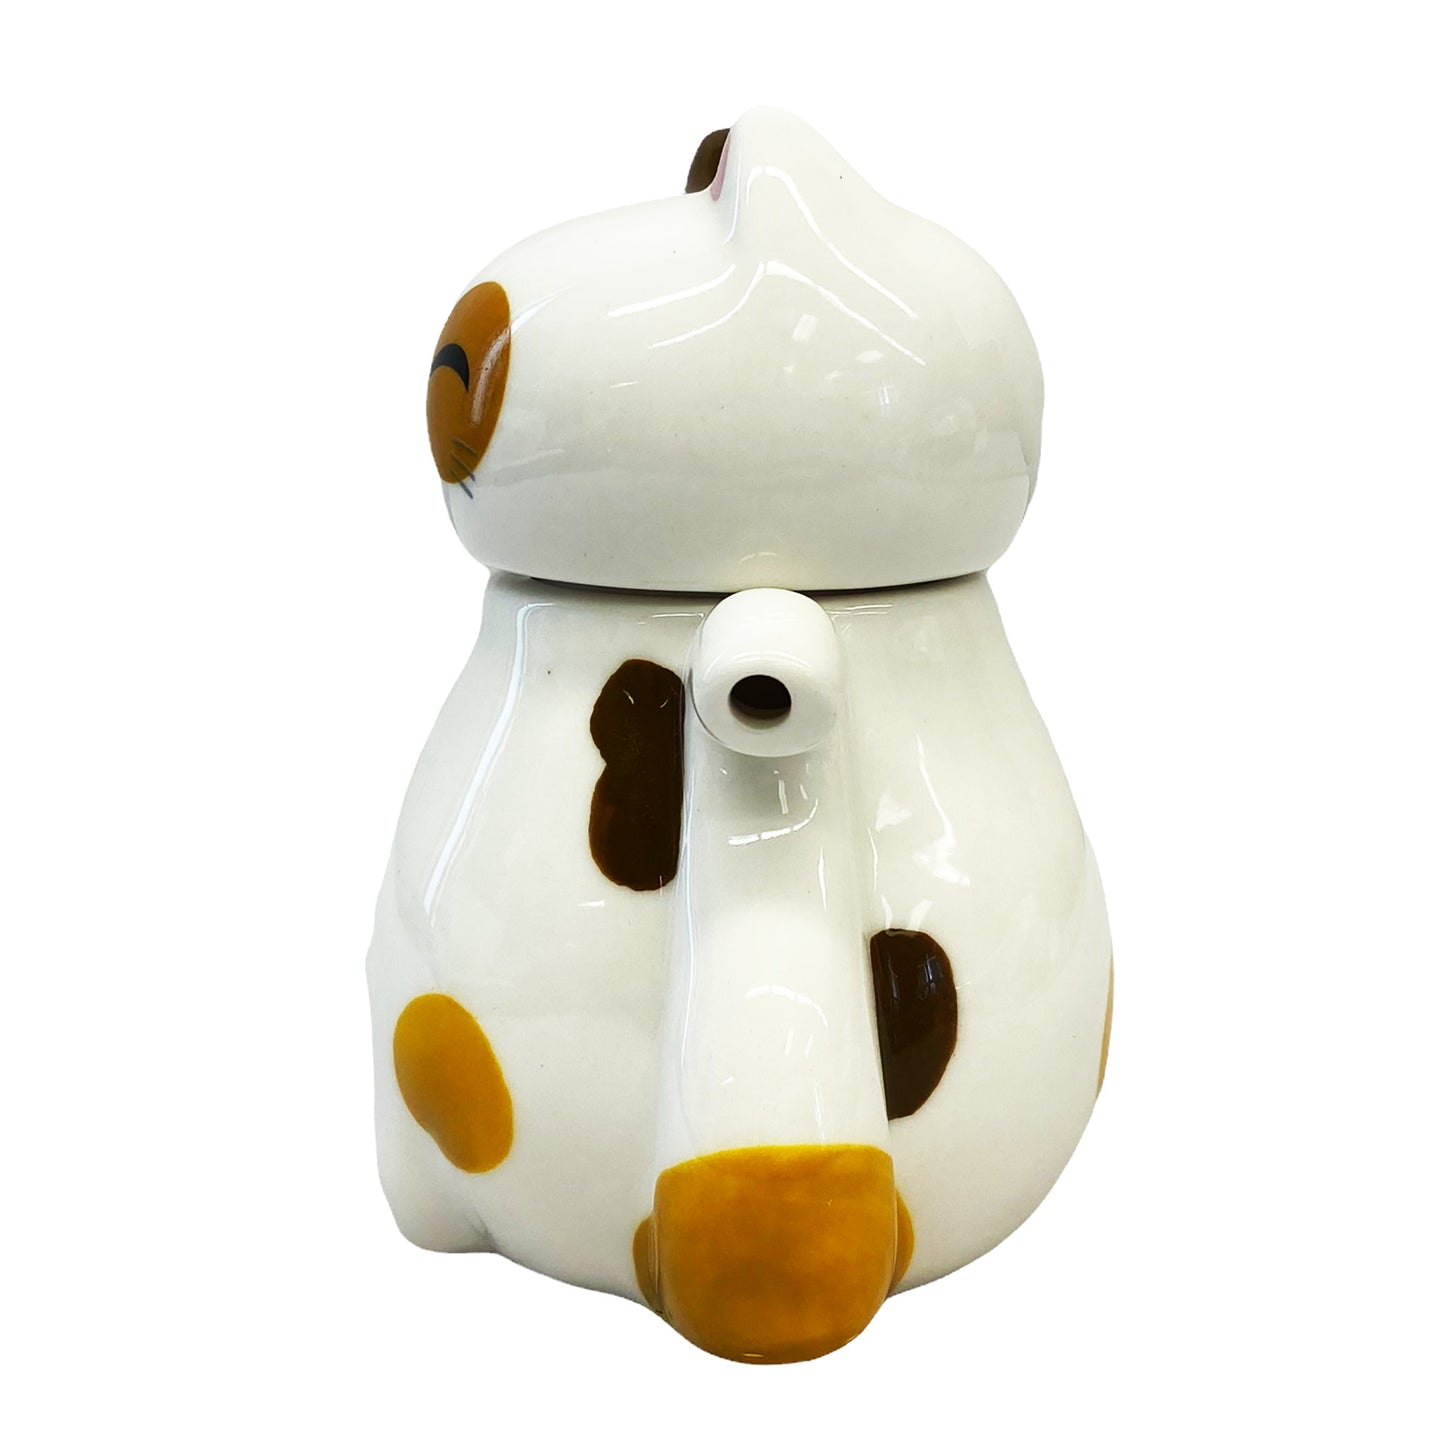 Side graphic view of Genki Cats Porcelain Sauce Dispenser - Beige 3.75 Inches 4oz 